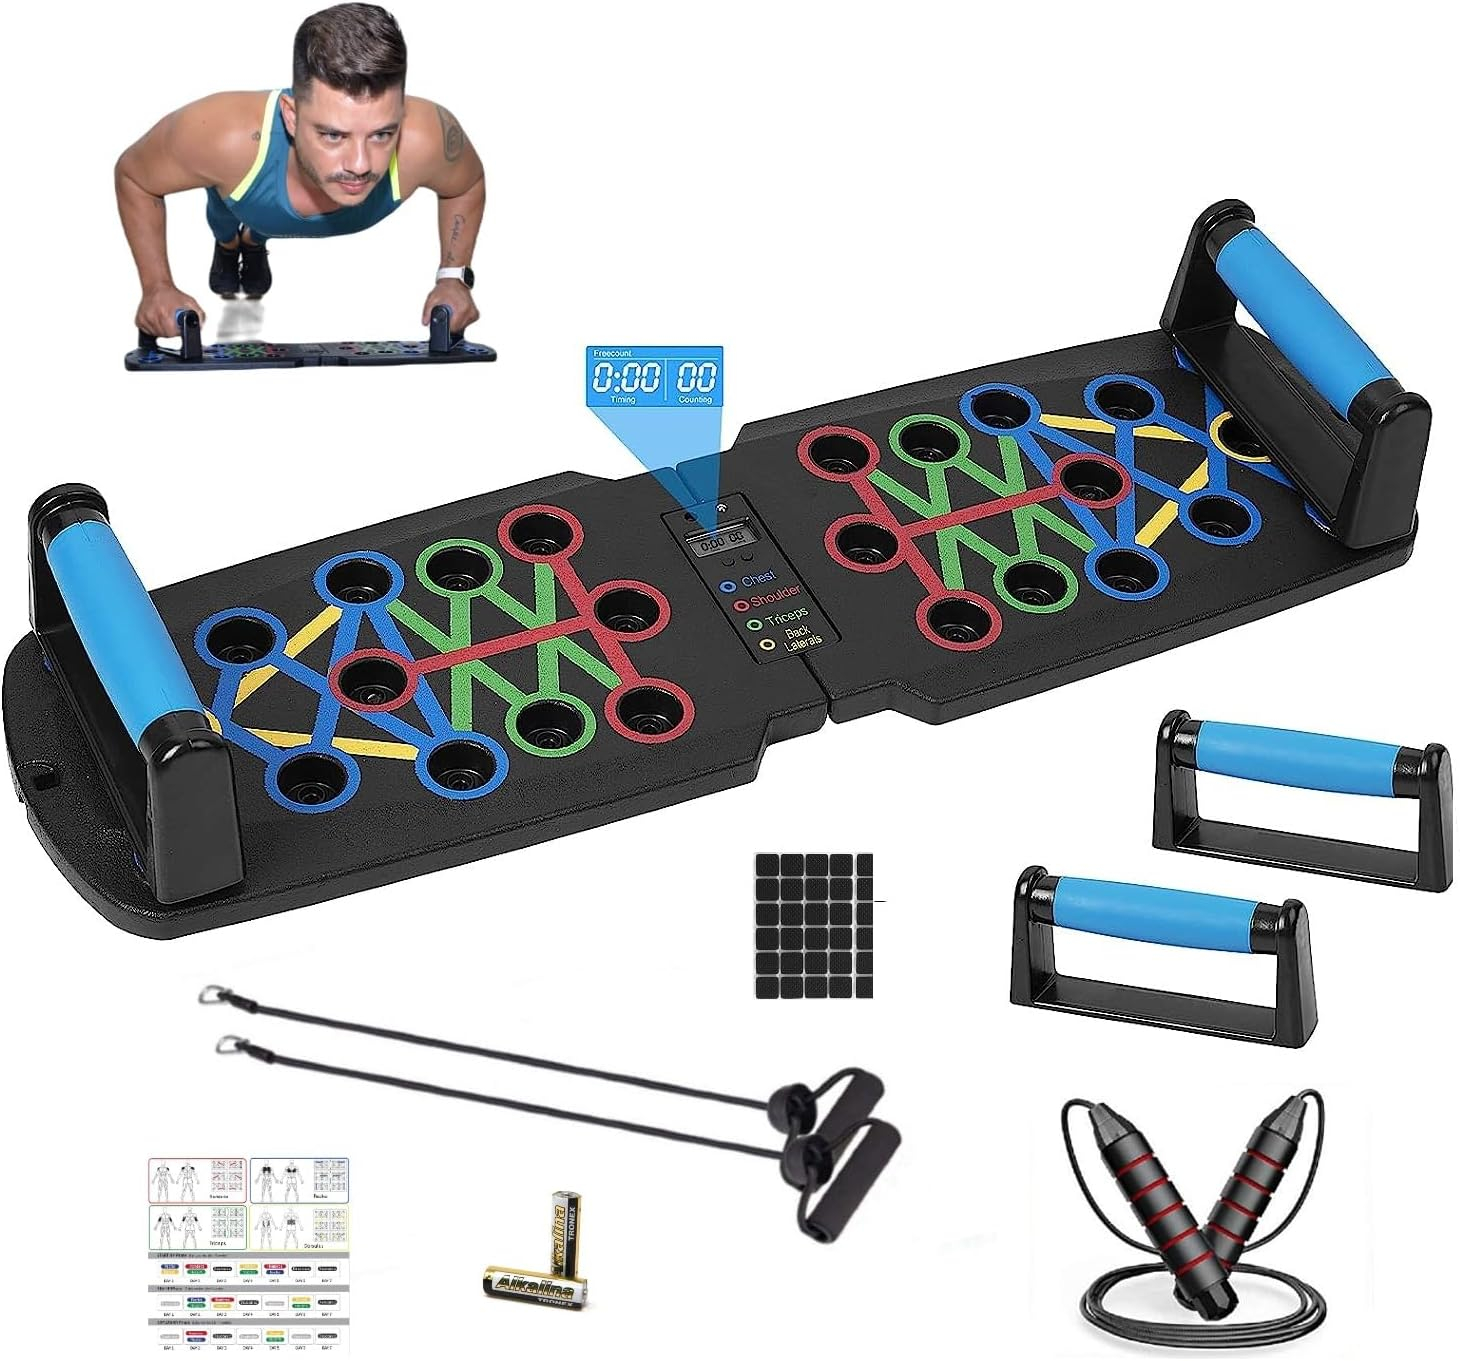 Push Up Board with Automatic Count- multifunctional fitness board 14 in 1 push up bar with resistance bands, perfect pushup handles to maximize push up with foldable home gym, jump rope exercise, workout equipment, pushup machine to strengthen different muscle groups in a portable gym.